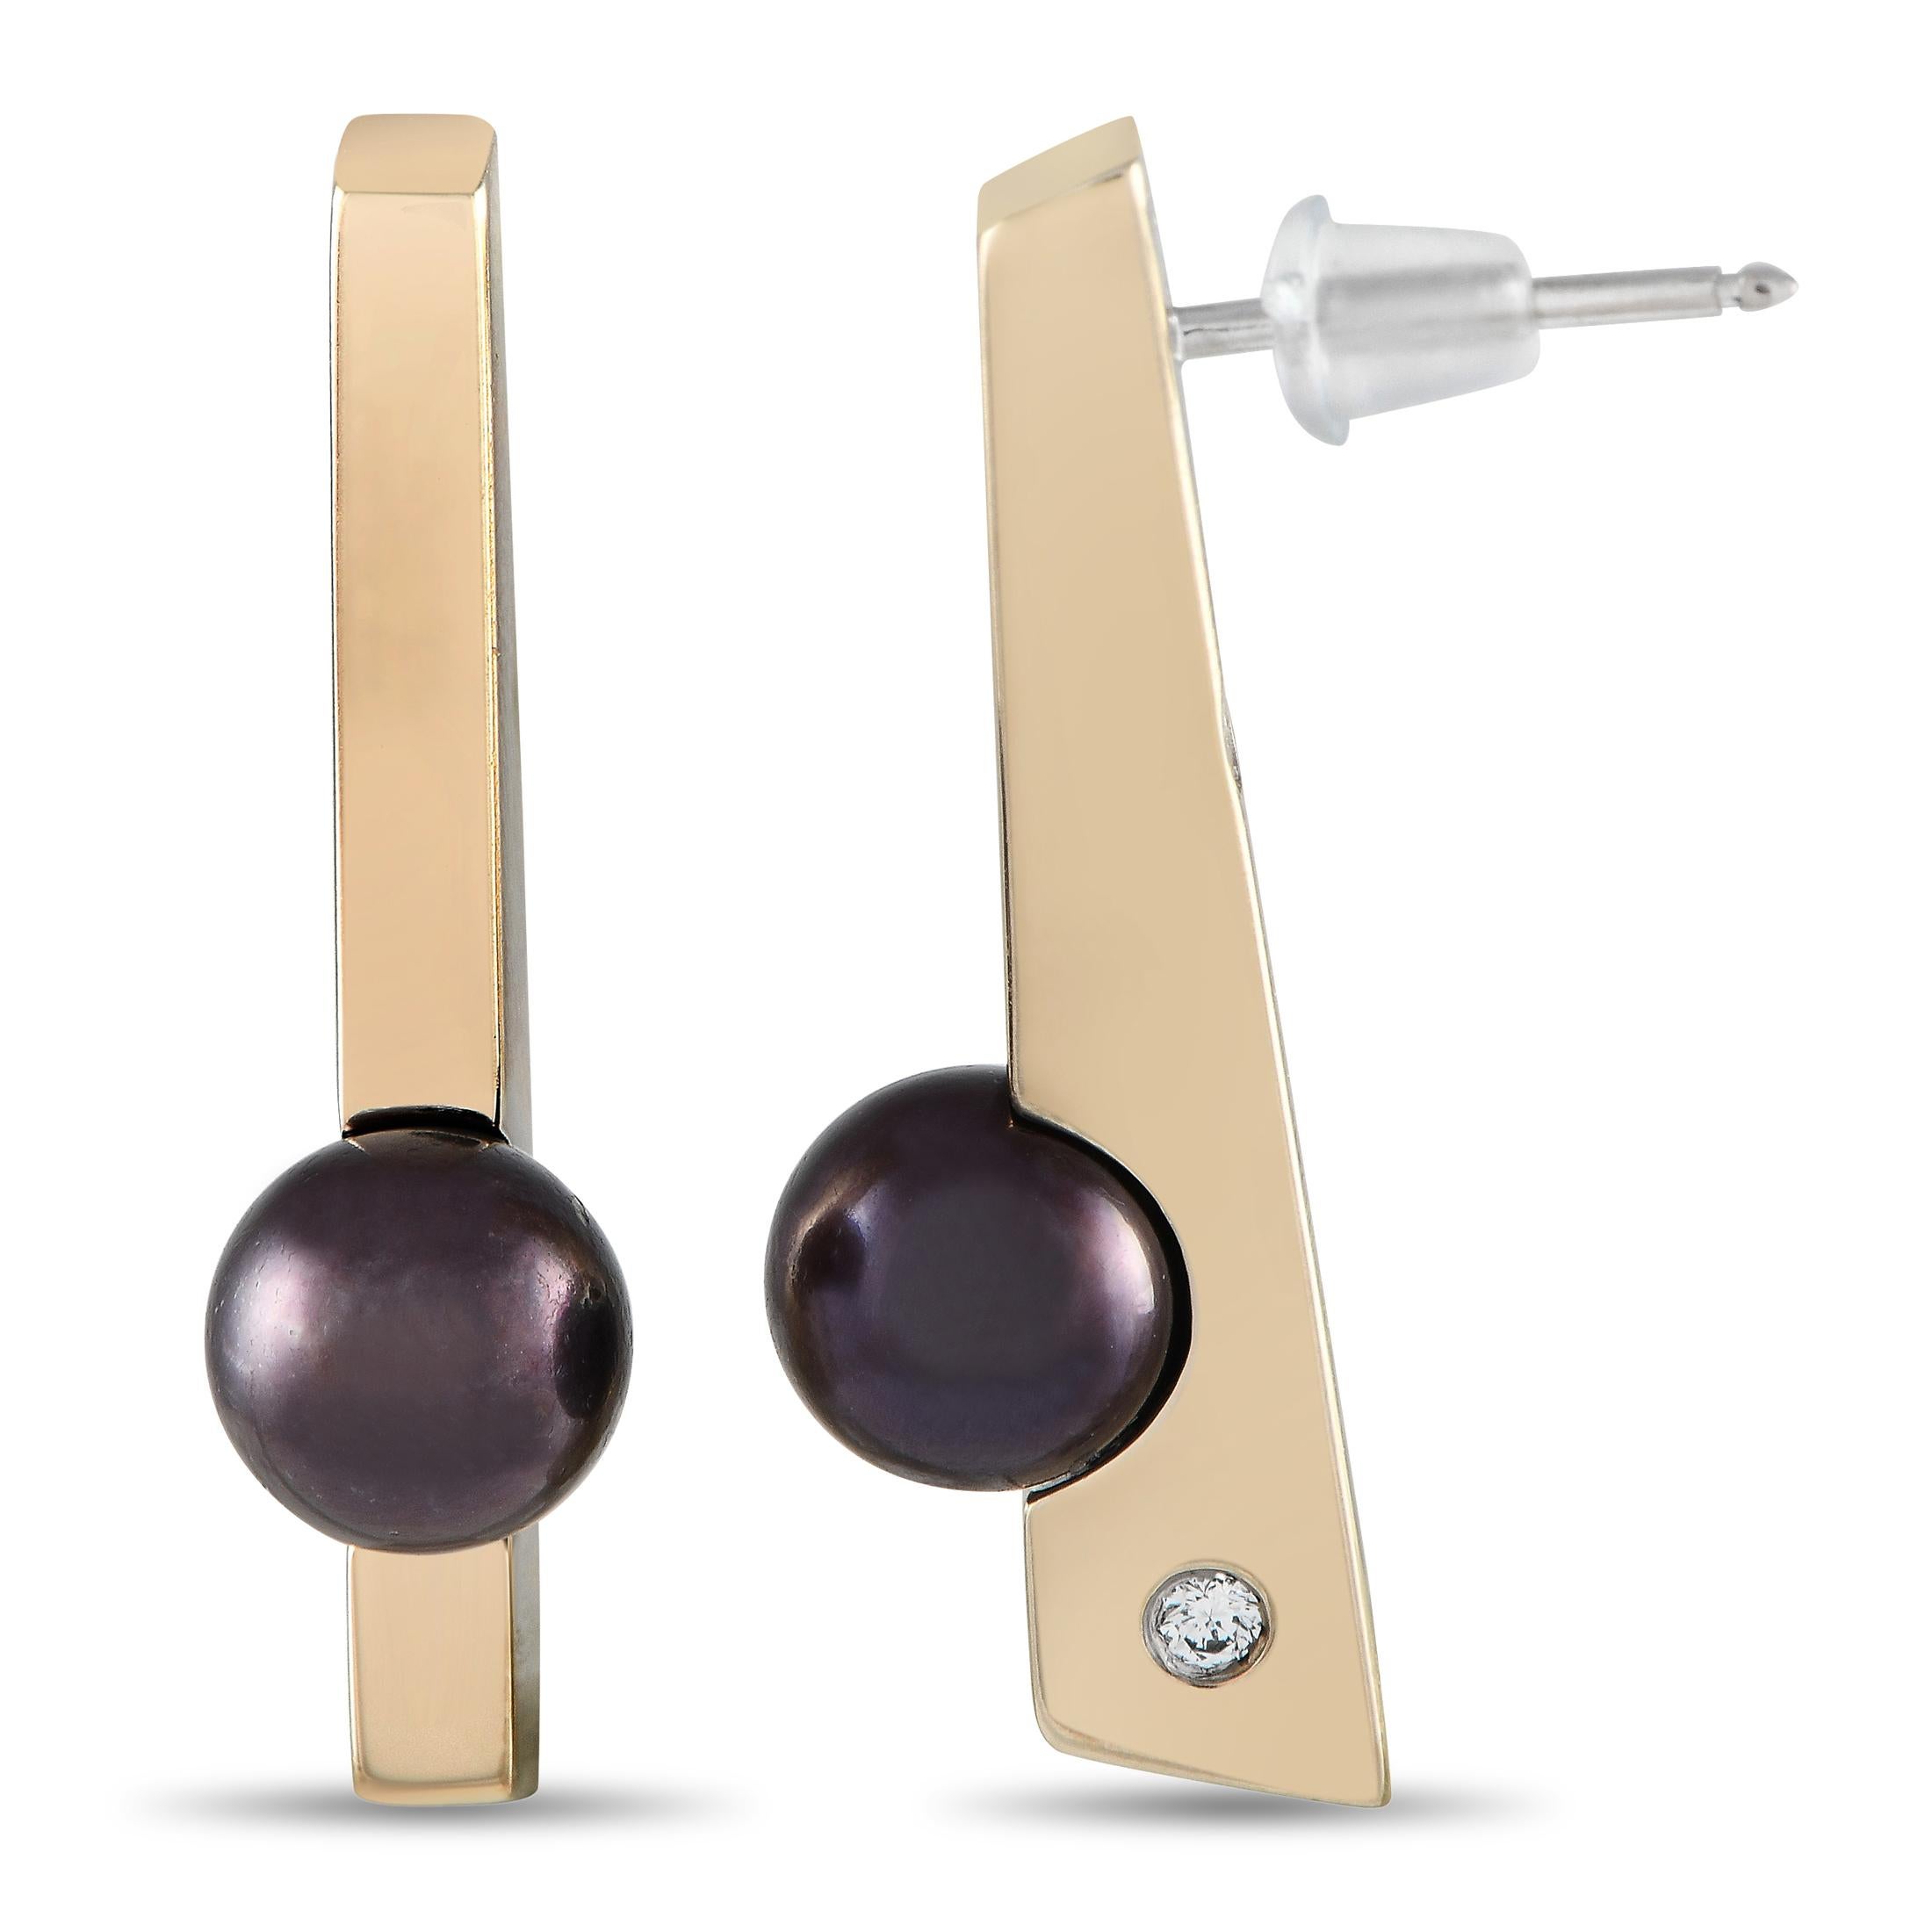 Movado embraced the art of contrasts when they designed this pair of earrings. The earrings feature an 18K yellow gold beam-like rod or vertical post sculpted with a curve to hold a black pearl in place. To give the earrings a subtle sparkle, a